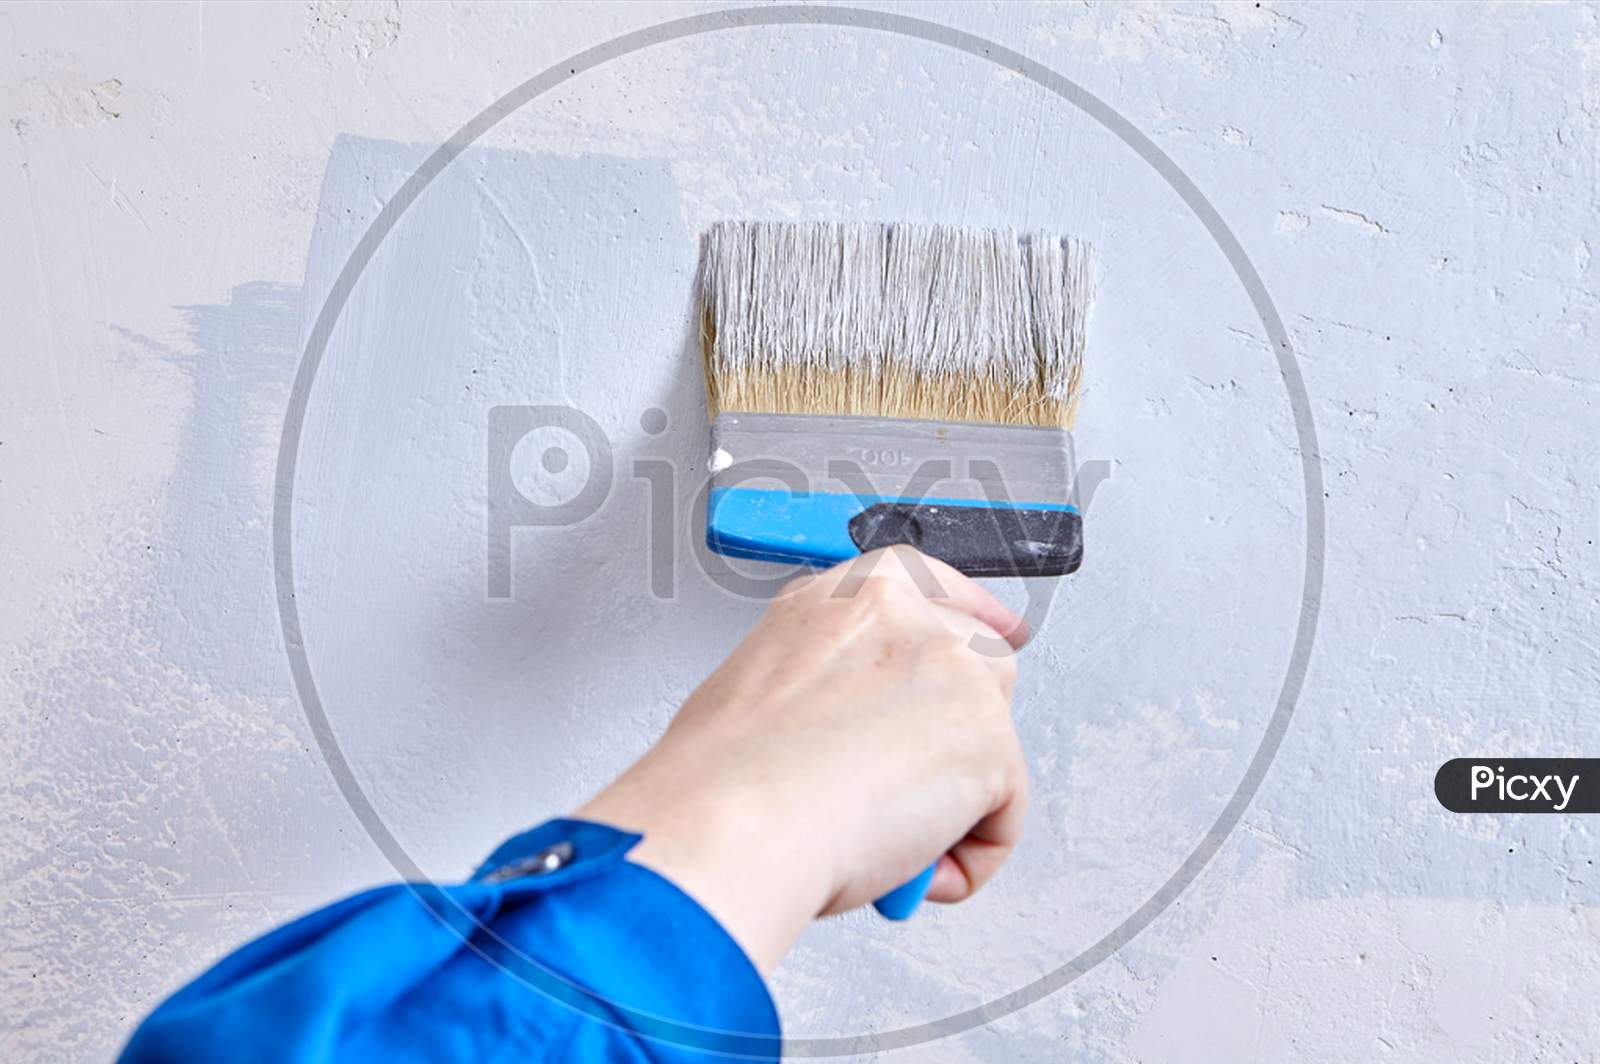 Painter Paints The Wall With A Paintbrush. Handyman Is Covering Beton With Color Using Paint Brush During Renovation.